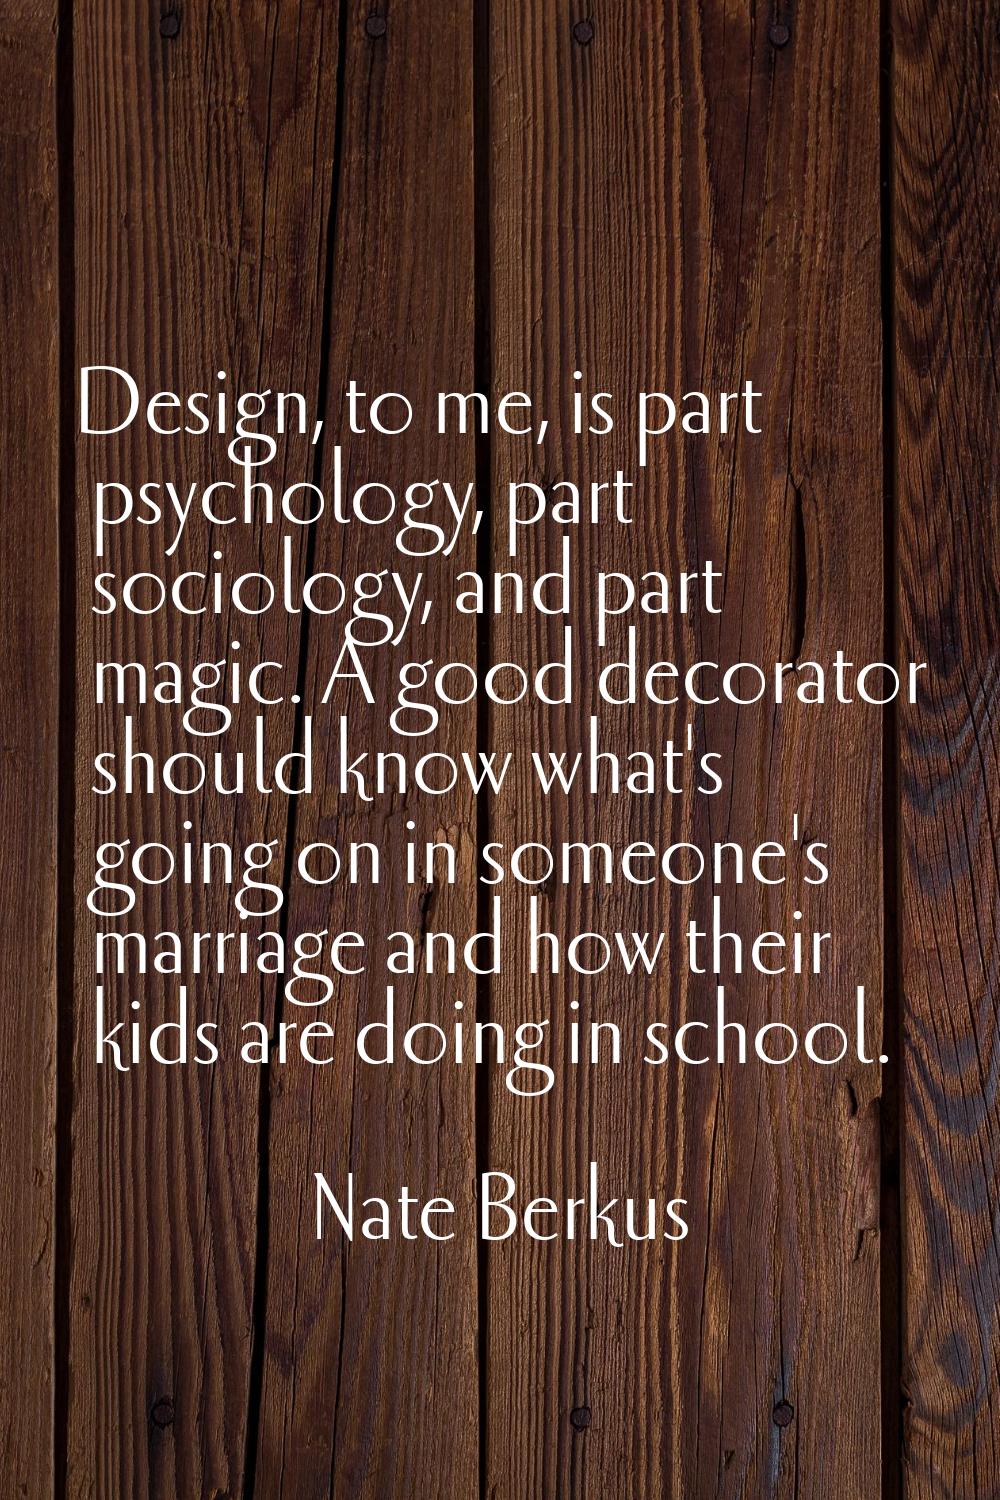 Design, to me, is part psychology, part sociology, and part magic. A good decorator should know wha